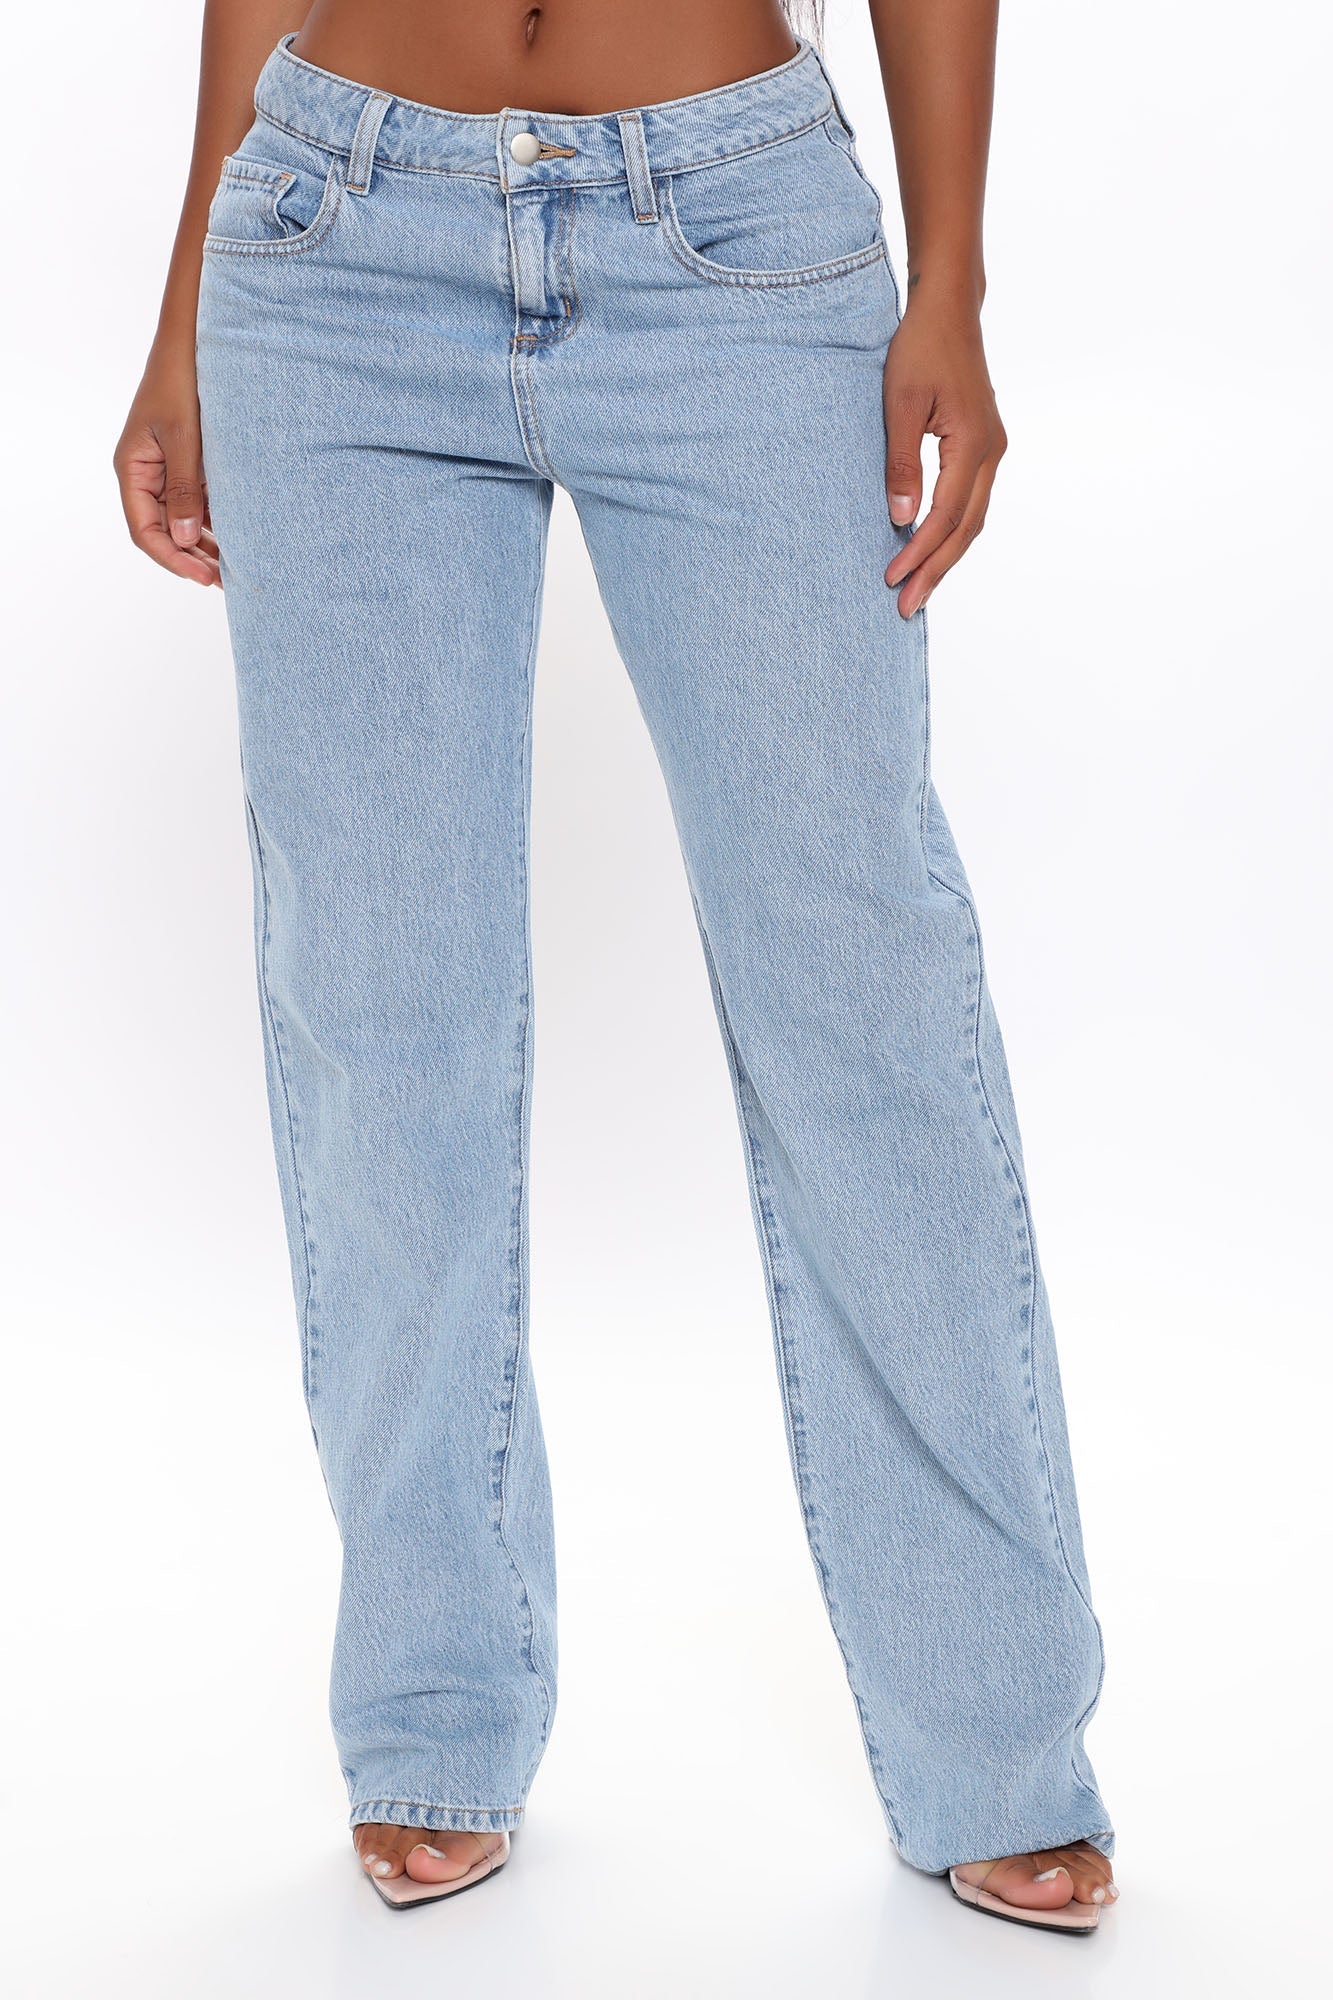 Low Rider Slouch Fit Jeans - Light Blue Wash Ins Street